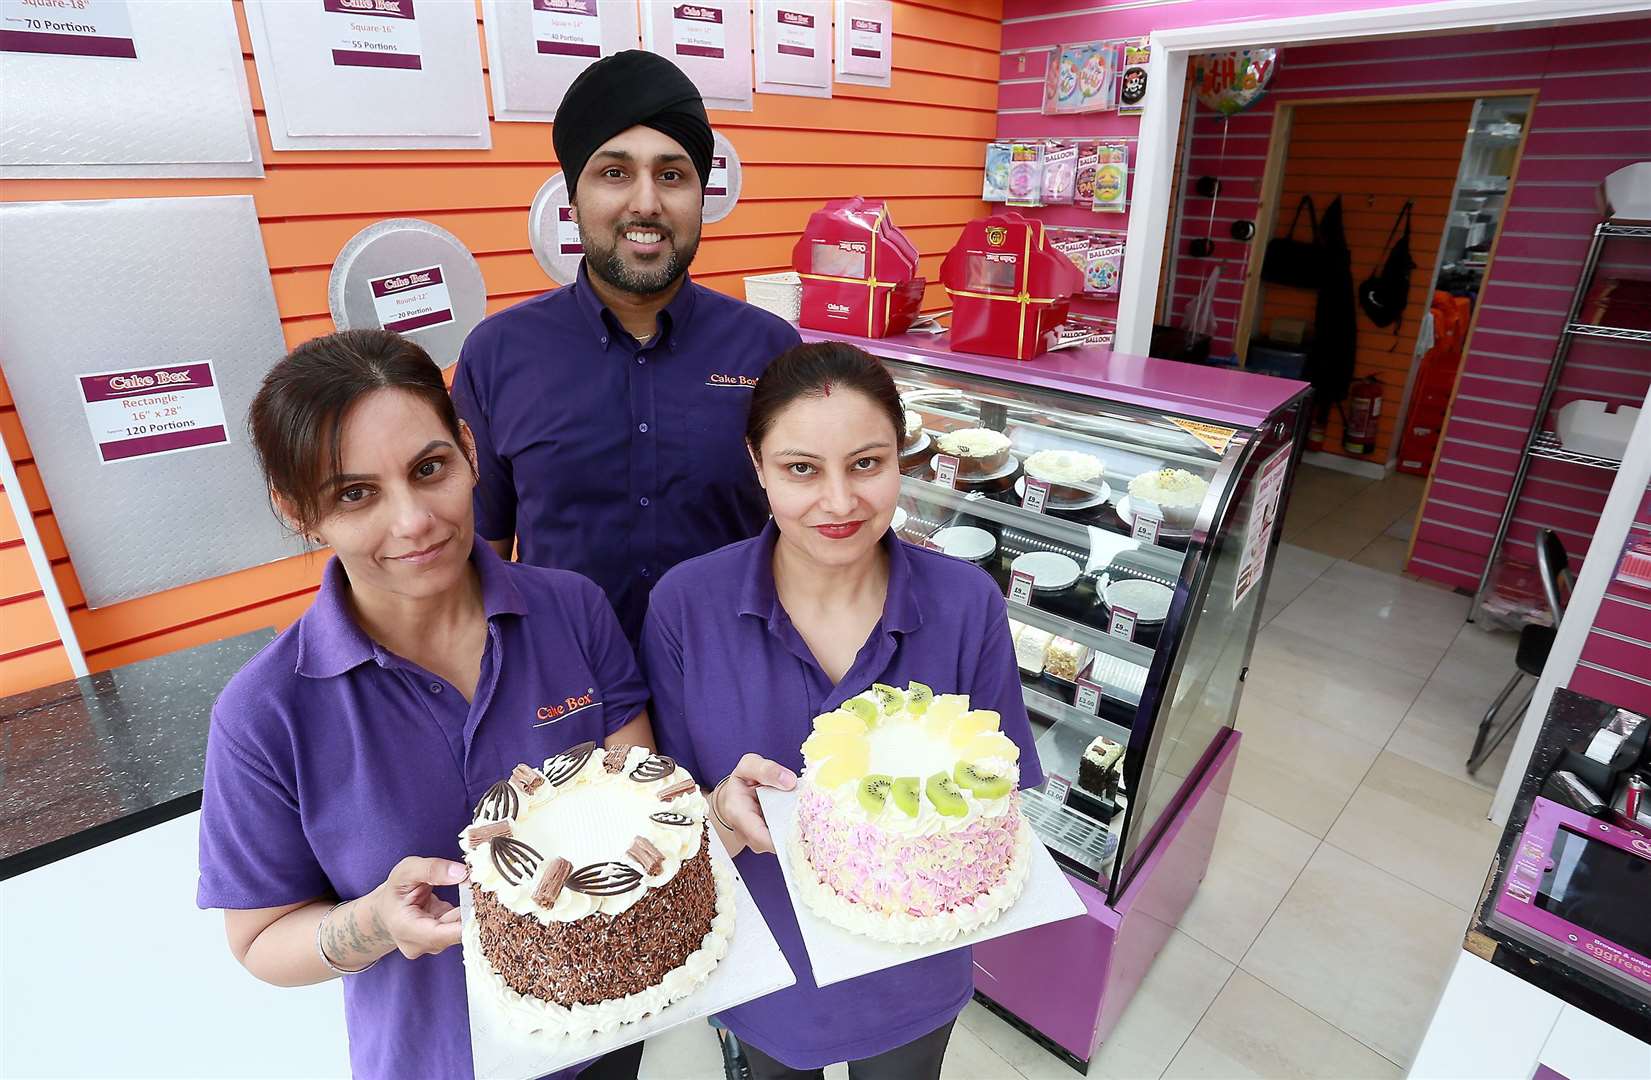 Manager of The Cake Box Jas Willis (left) said business has been affected. Picture: Phil Lee